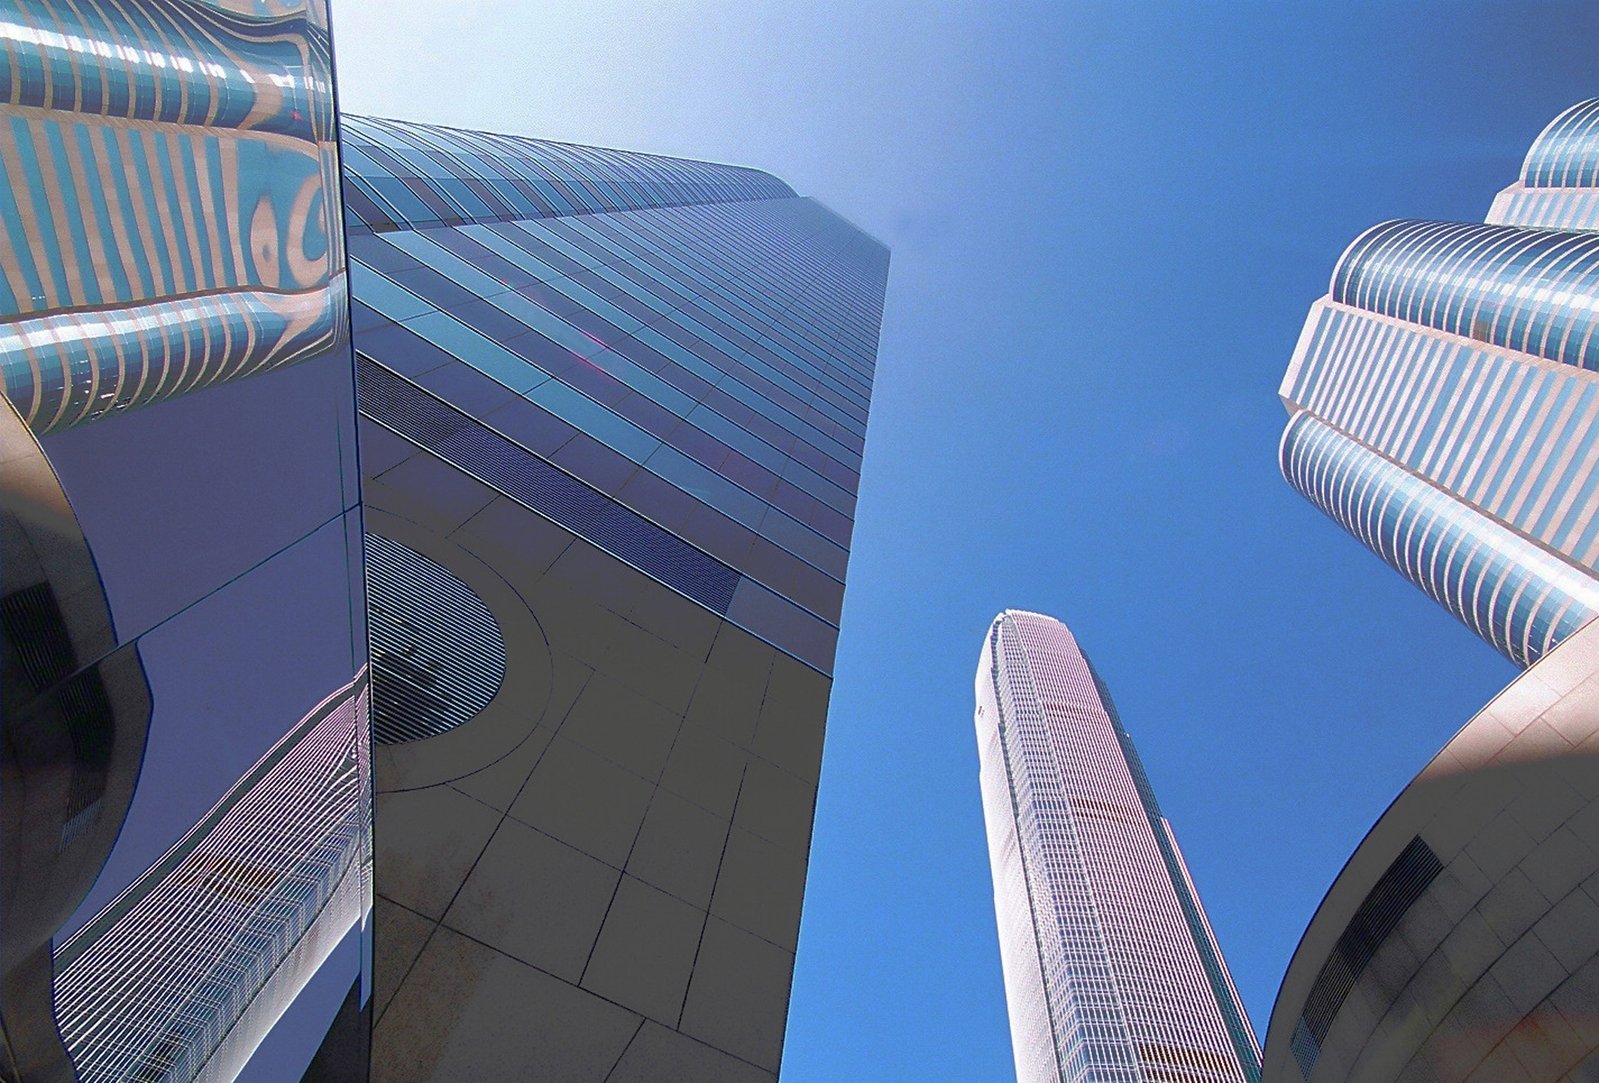 a close up view of two tall skyscrs against a blue sky